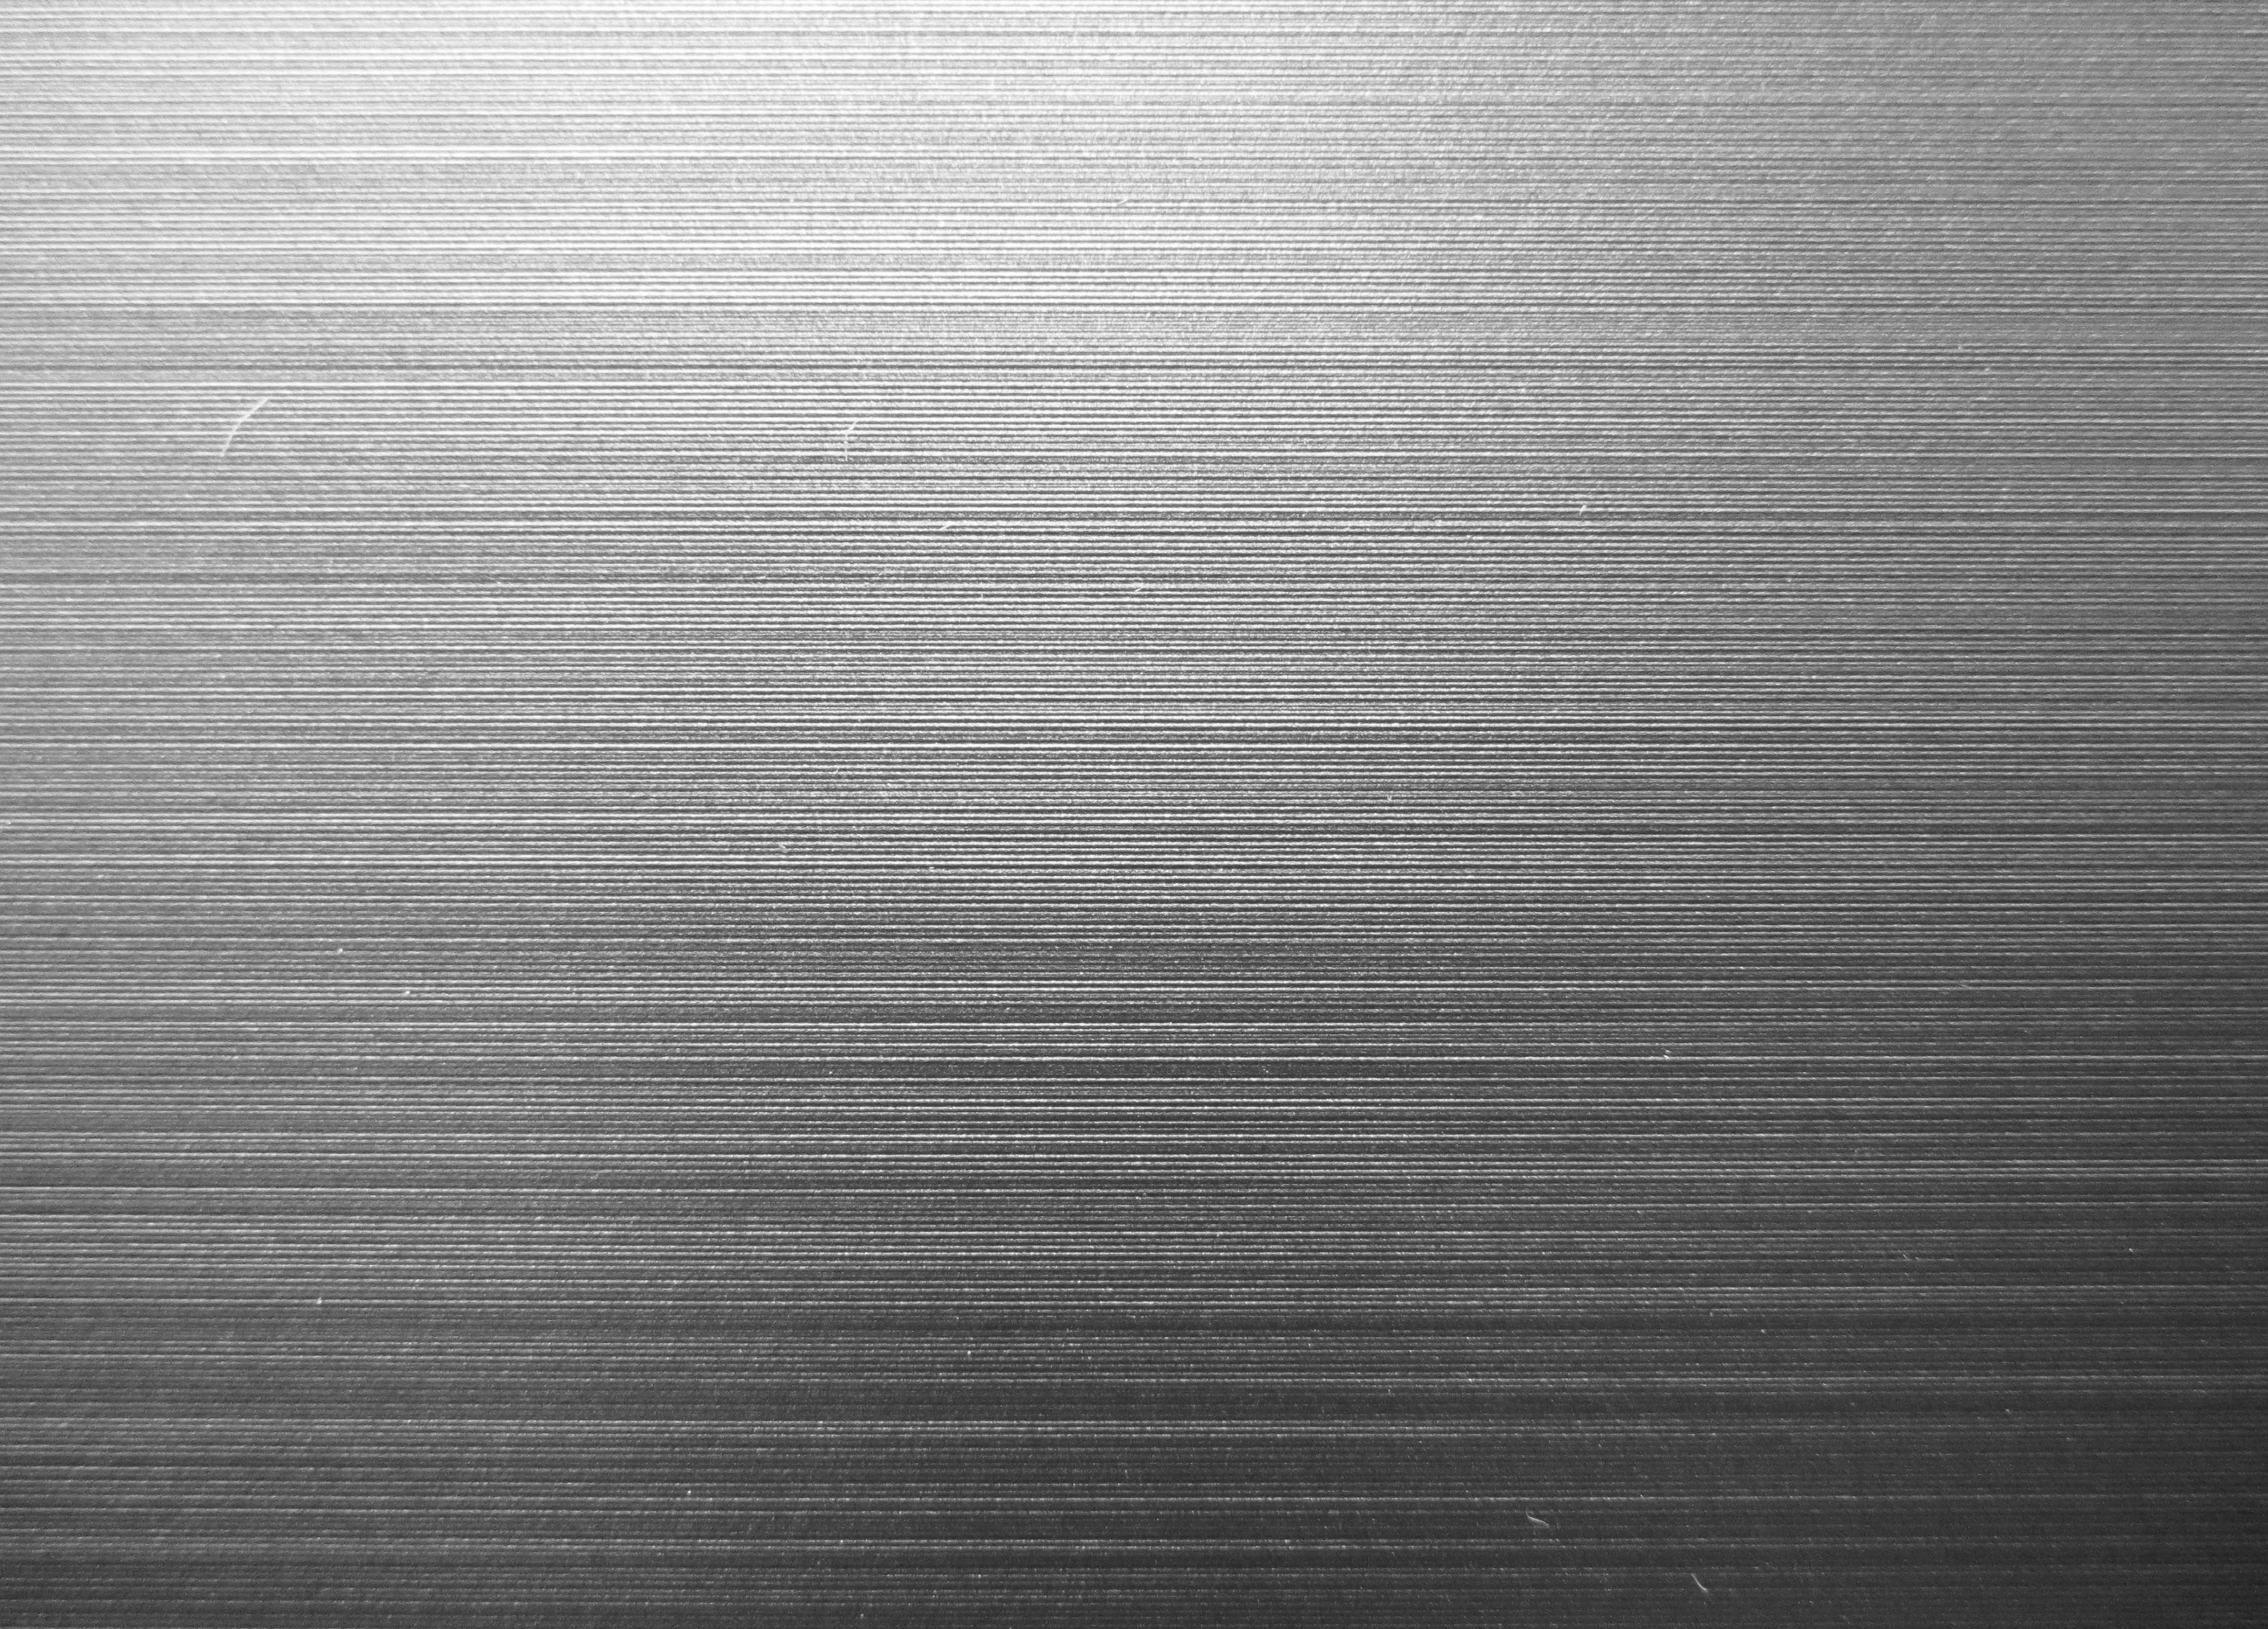  brushed silver texture metal surface thick line metallic wallpaper